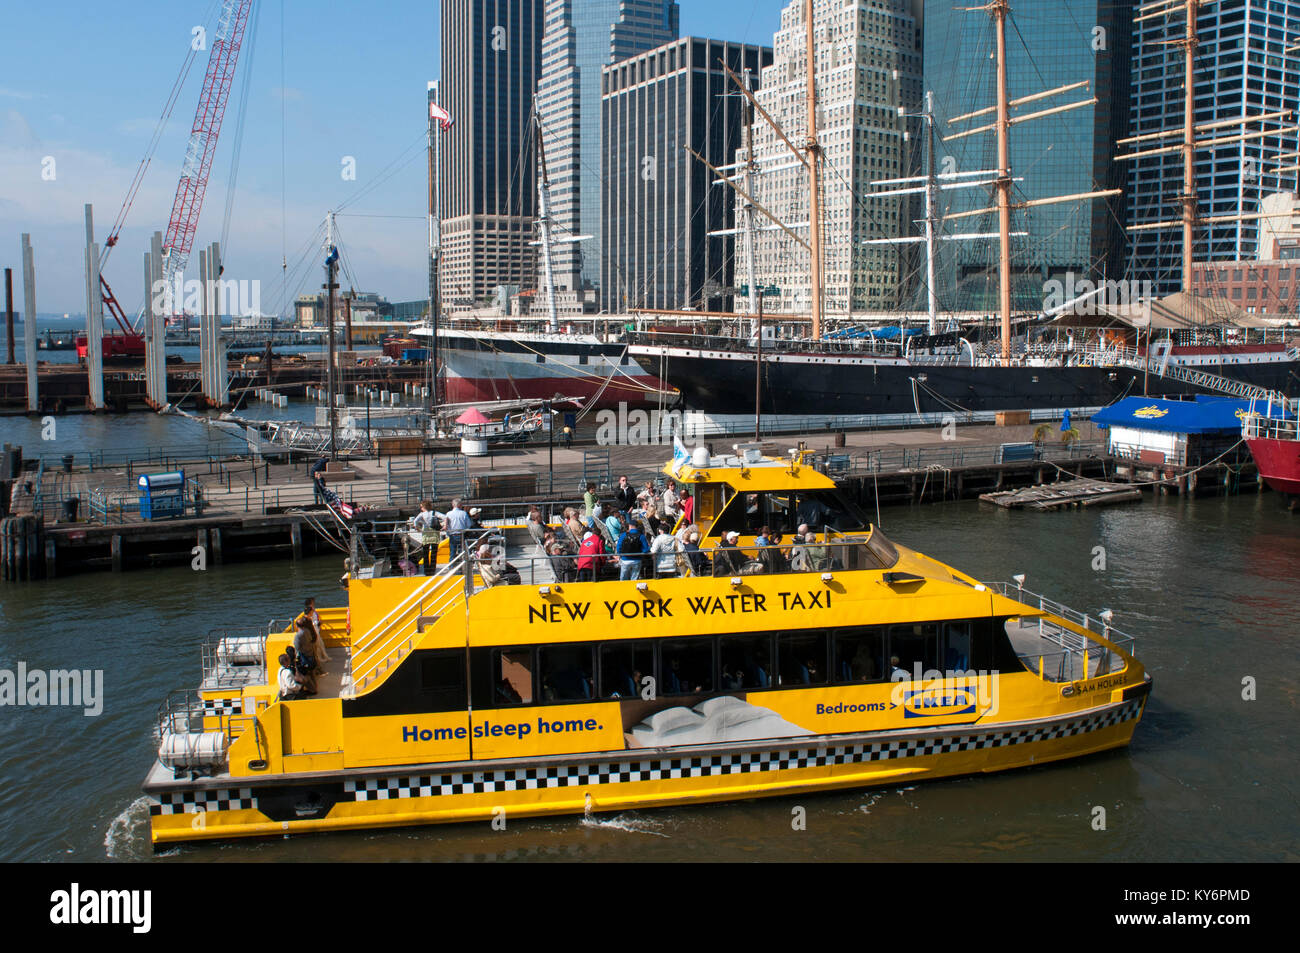 Water Taxi at New Yorks South Street Seaport.  Lower Manhattan, New York City, United States. Water Taxi at New Yorks South Street Seaport. The histor Stock Photo